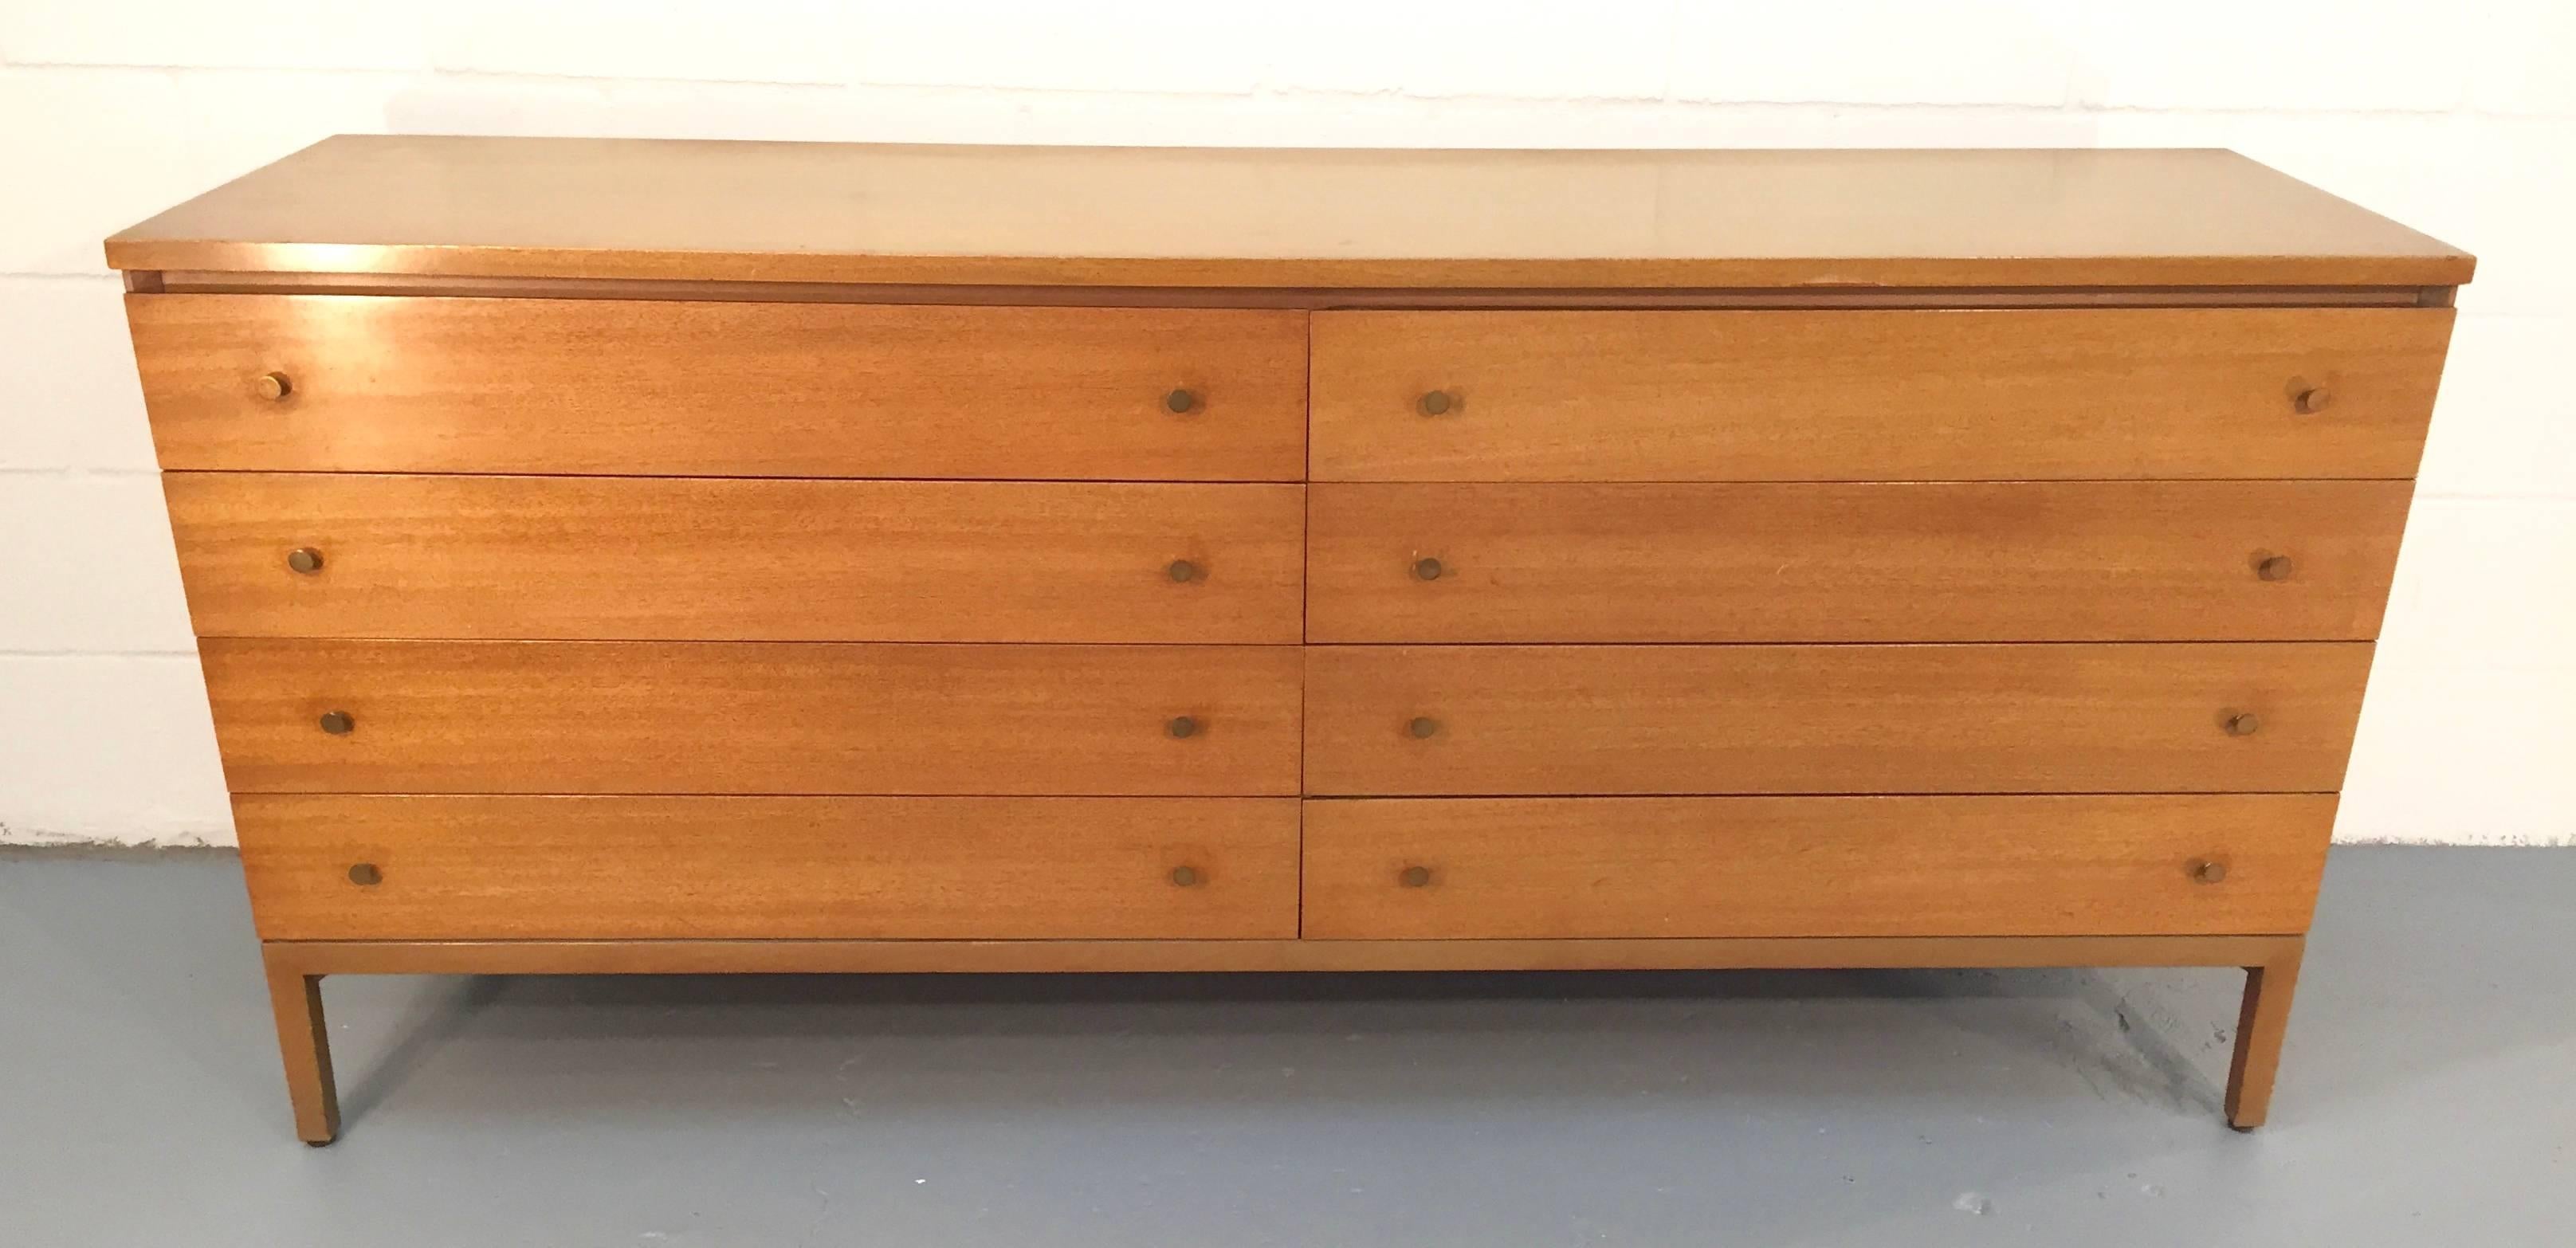 Chest of drawers with brass pulls by Paul McCobb for Calvin, USA, 1950s.